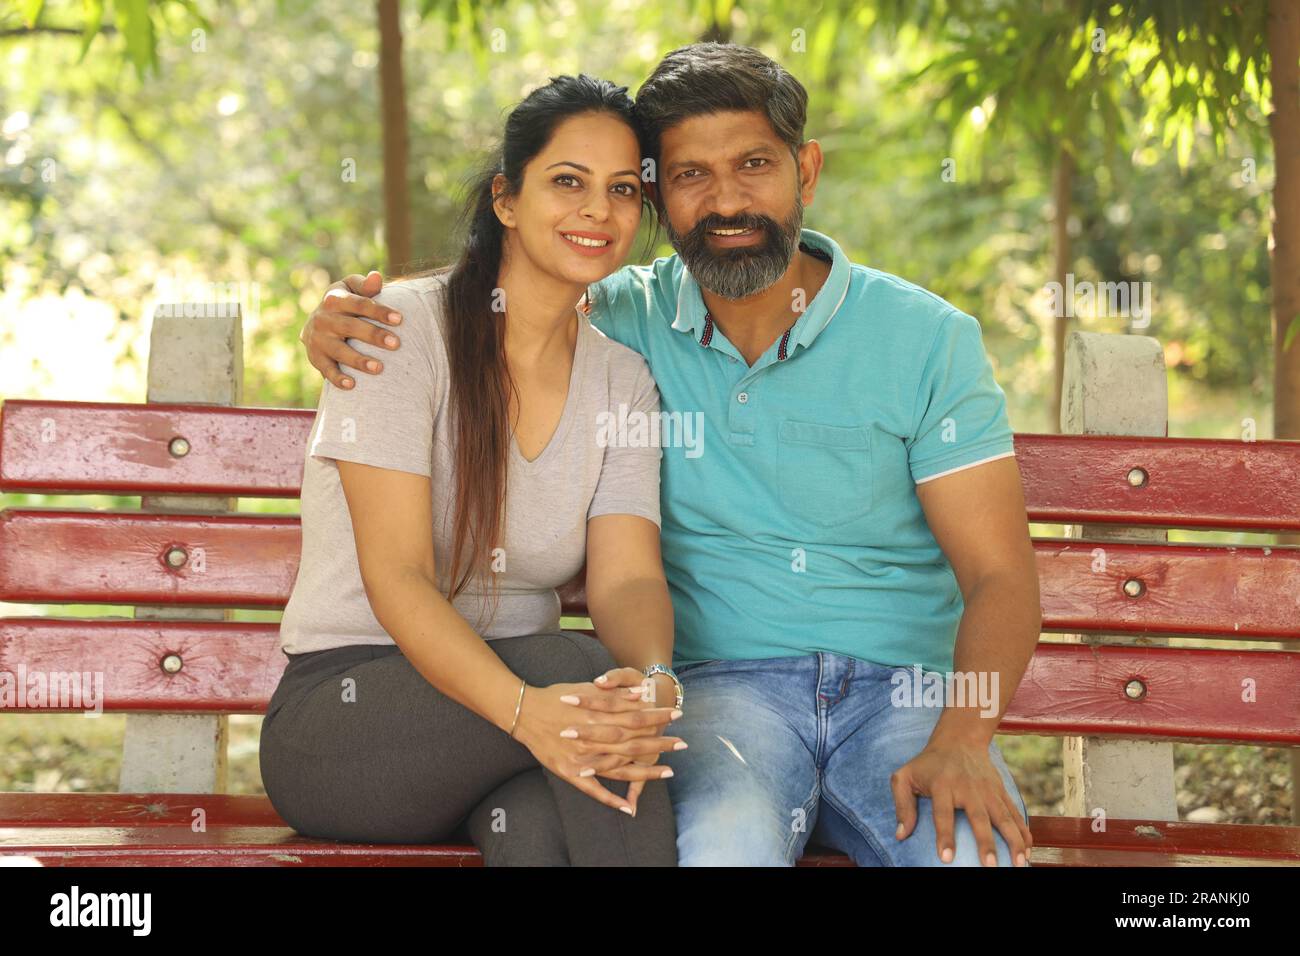 Portrait of a happy Indian couple sitting on the bench in the park amongst the greens. Stock Photo